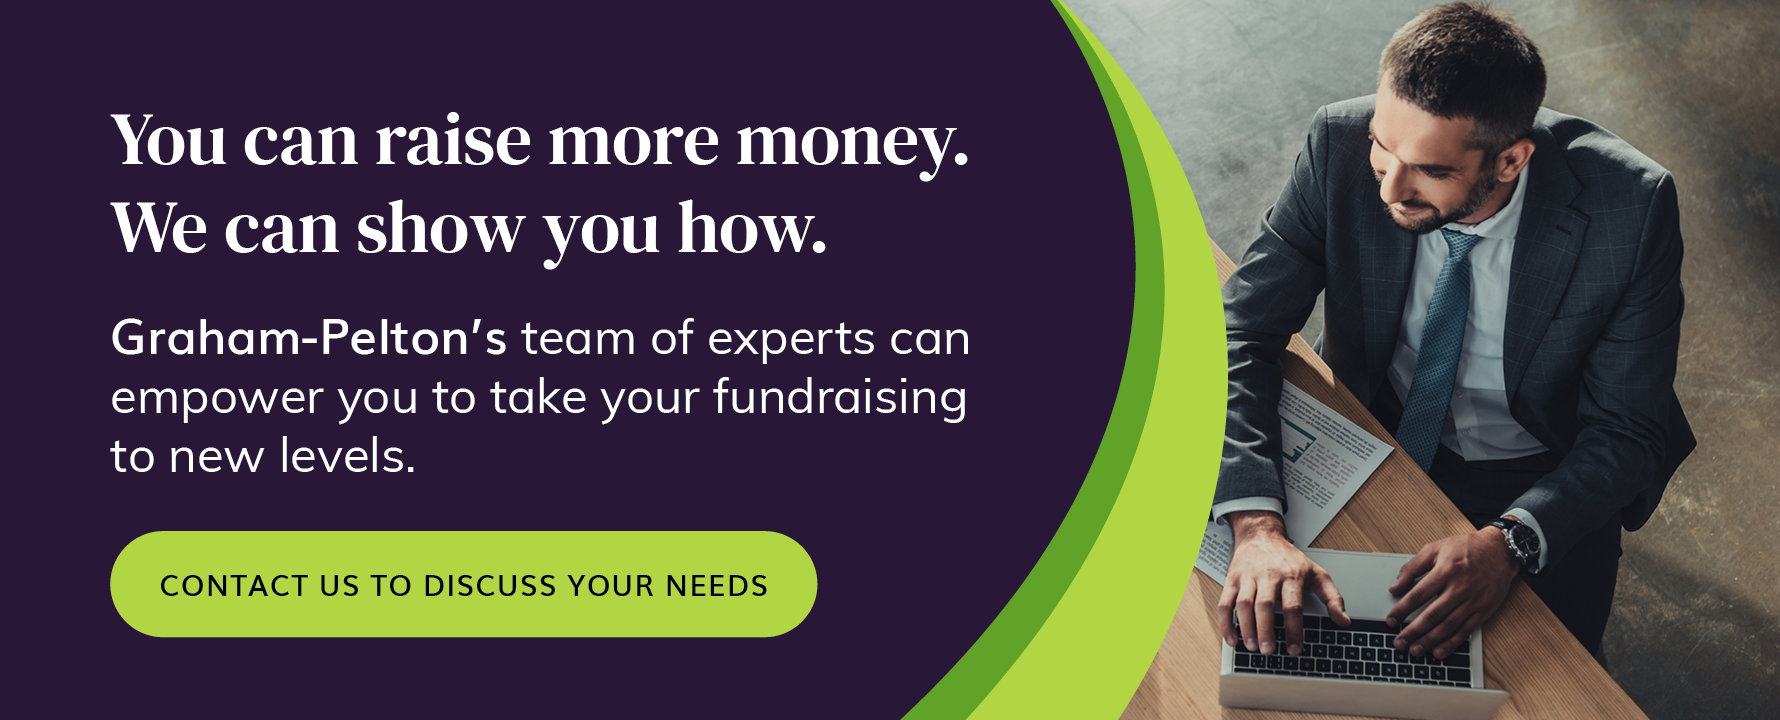 Connect with Graham-Pelton to discuss your fundraising needs.